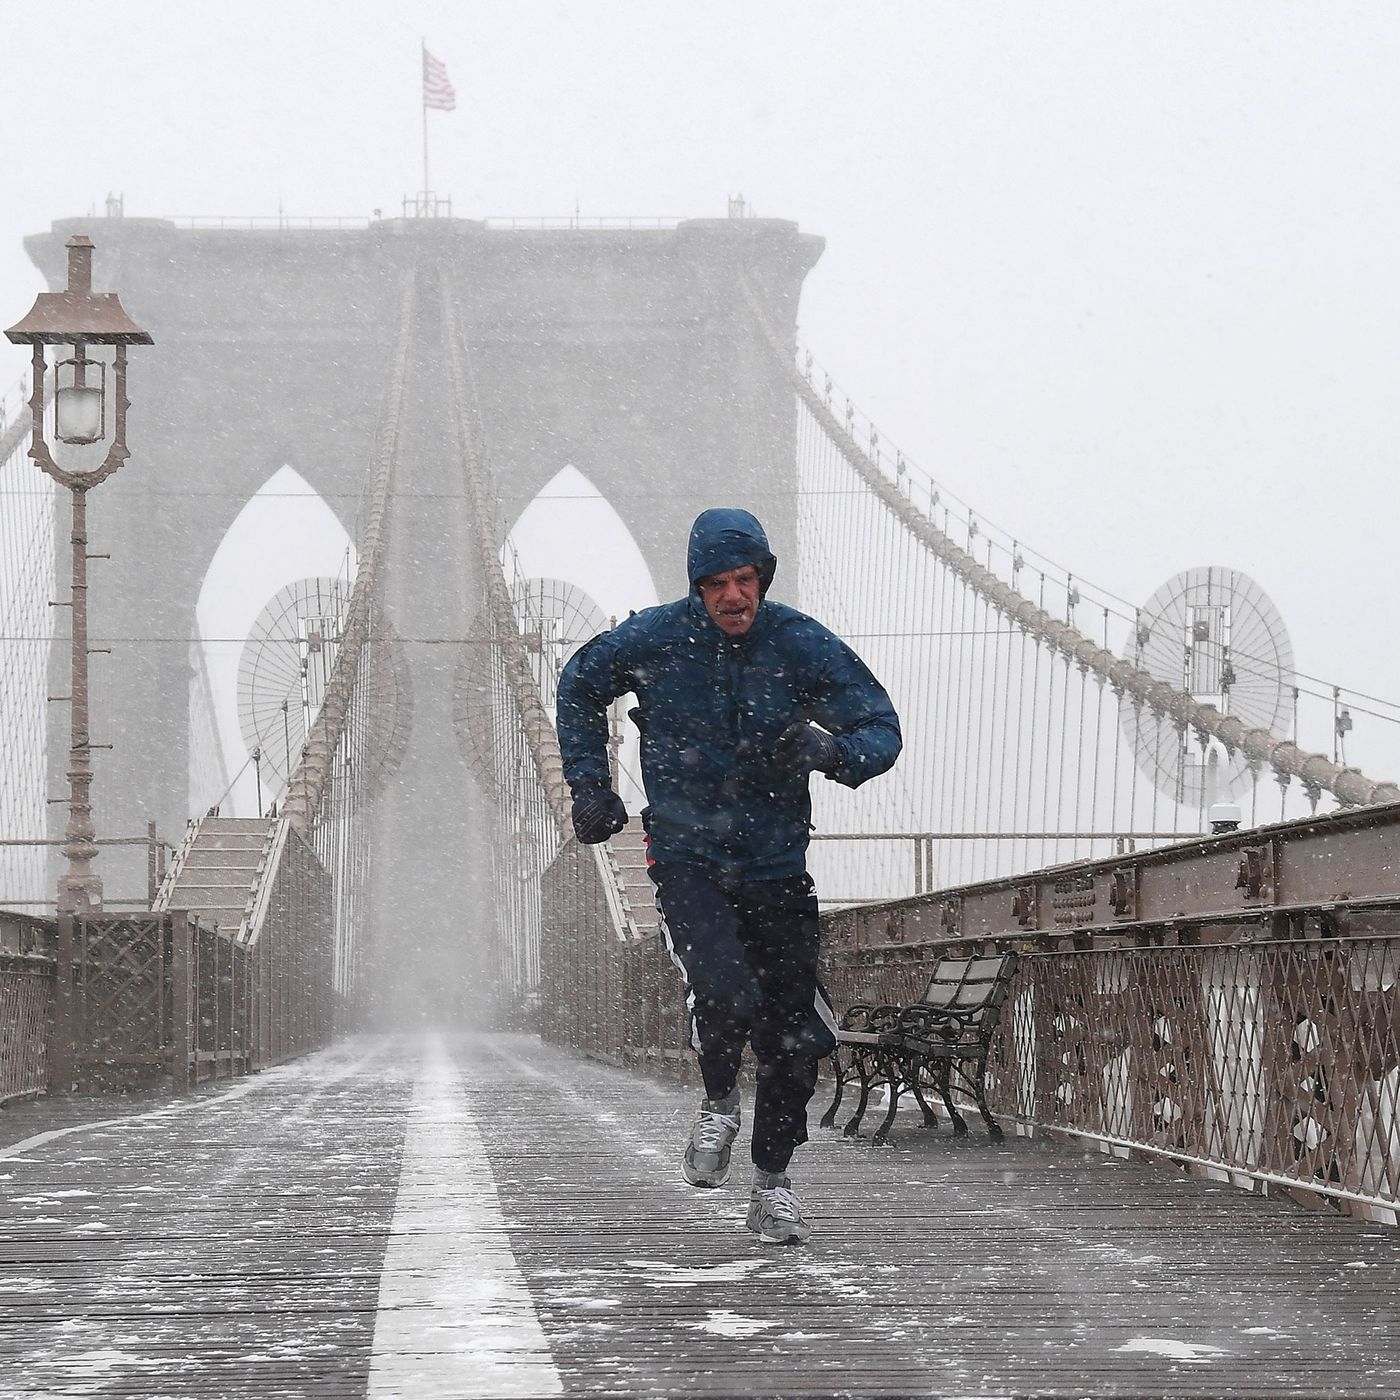 Winter Workout Gear That'll Make Your Cold Workouts Way Less Miserable